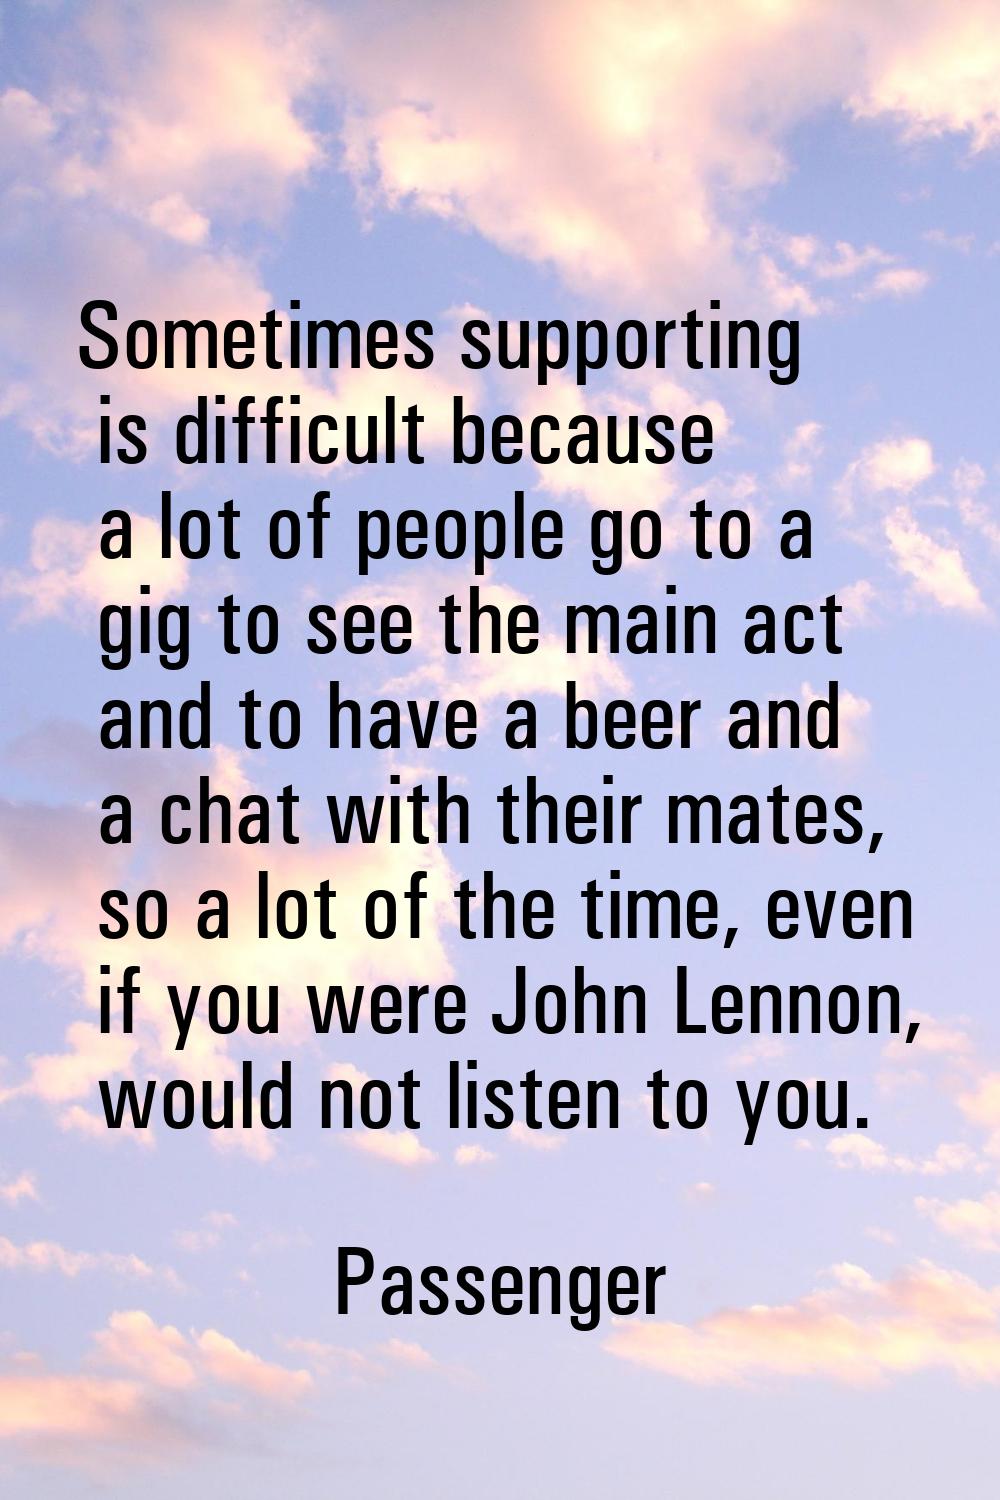 Sometimes supporting is difficult because a lot of people go to a gig to see the main act and to ha